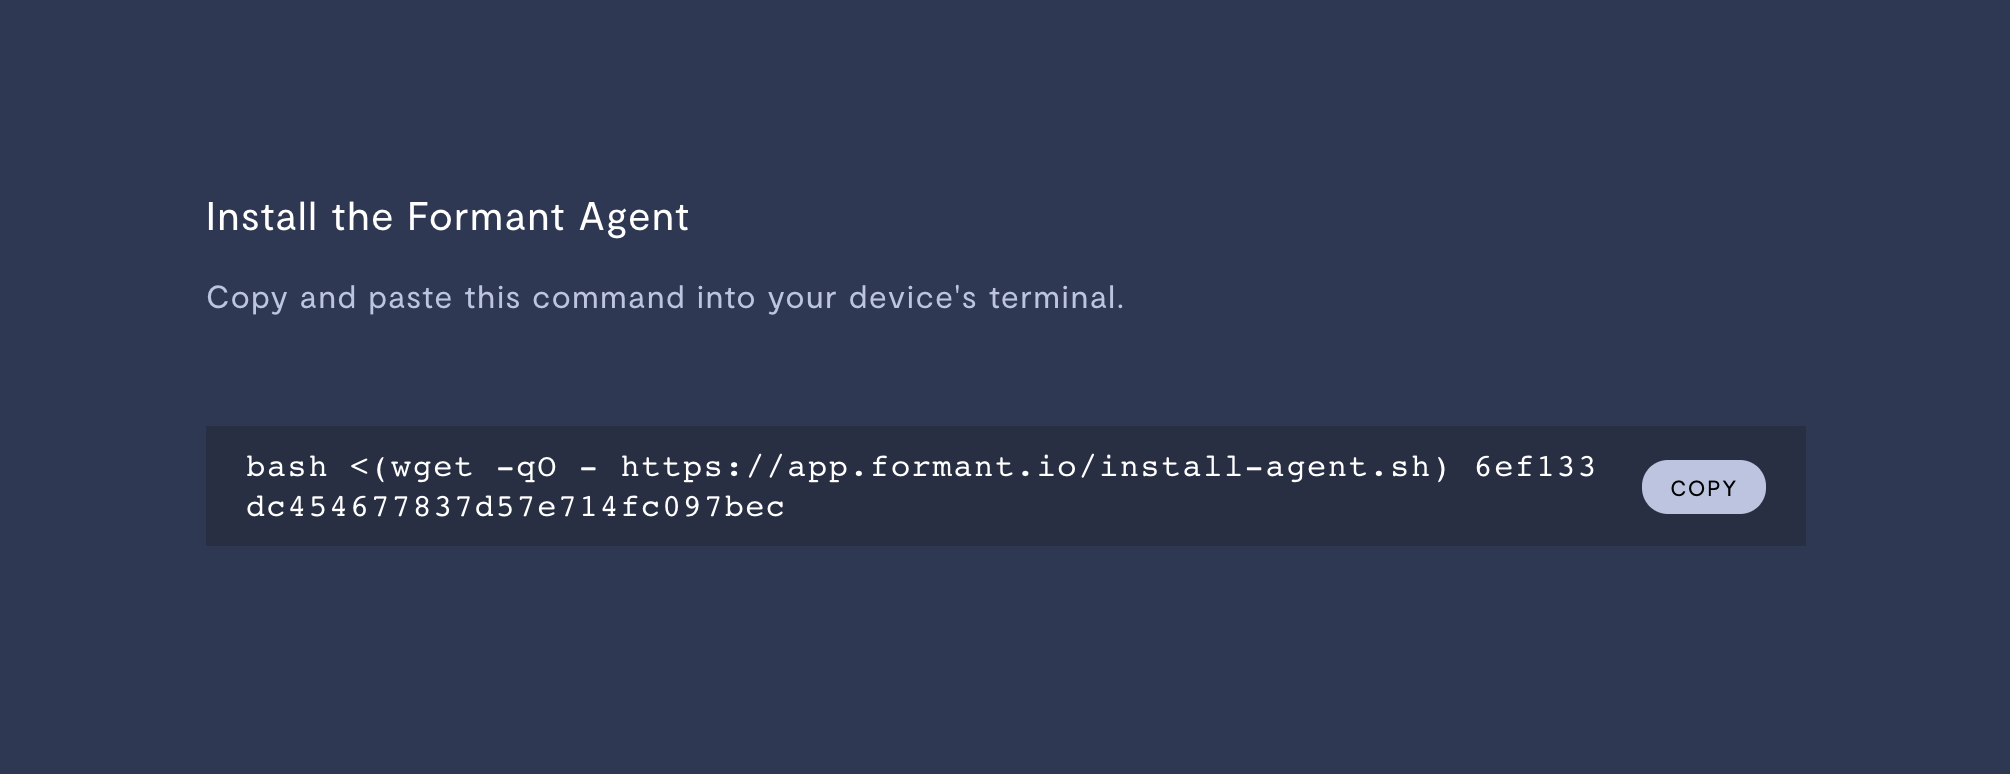 Copy and paste the command from the Formant website to your device's terminal